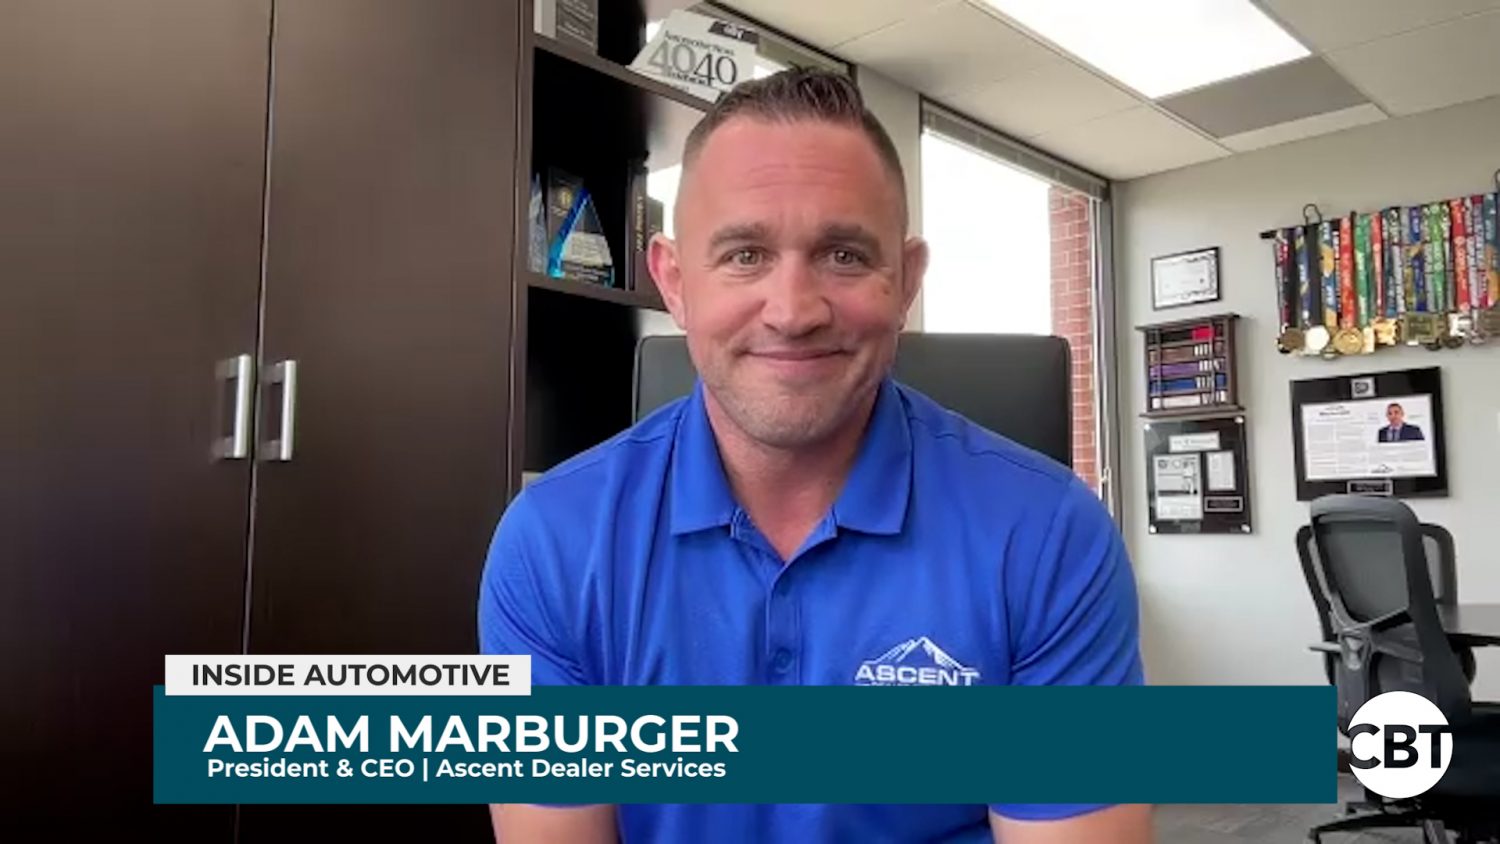 Adam Marburger, is here to discuss the transaction process approach on the latest episode of Inside Automotive. 